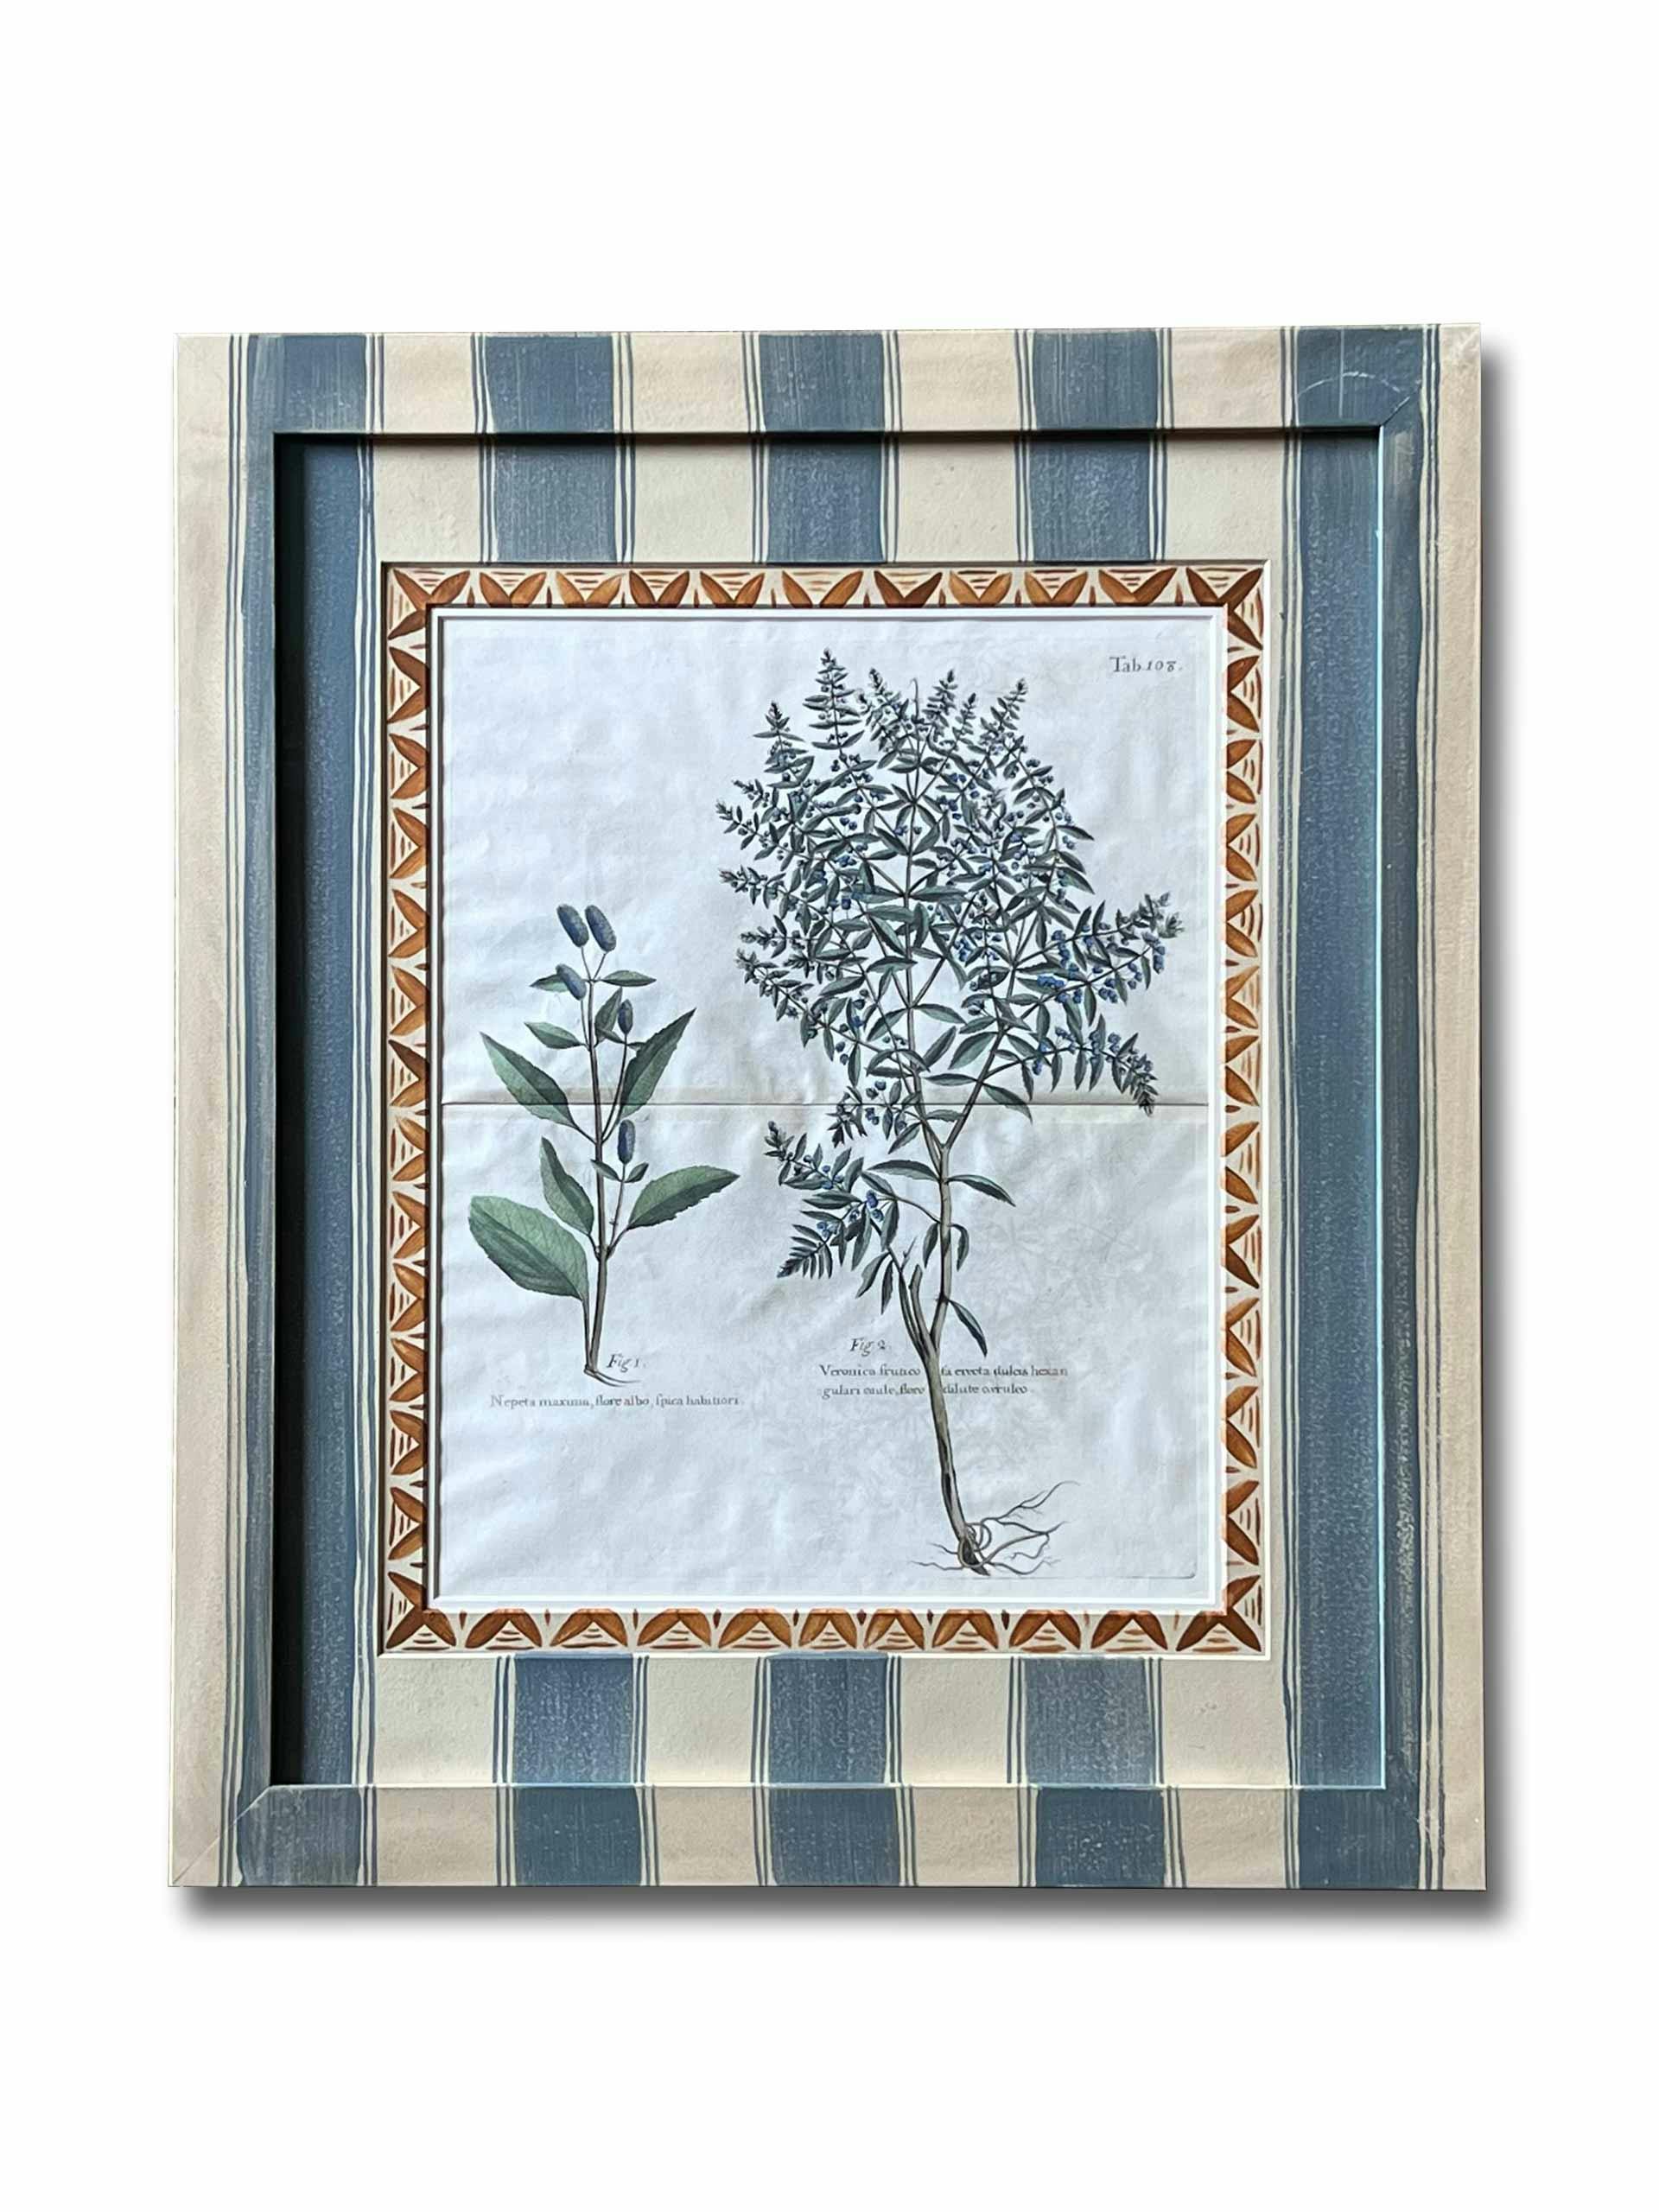 Hand-painted frame and 18th-century Sloane botanical mat